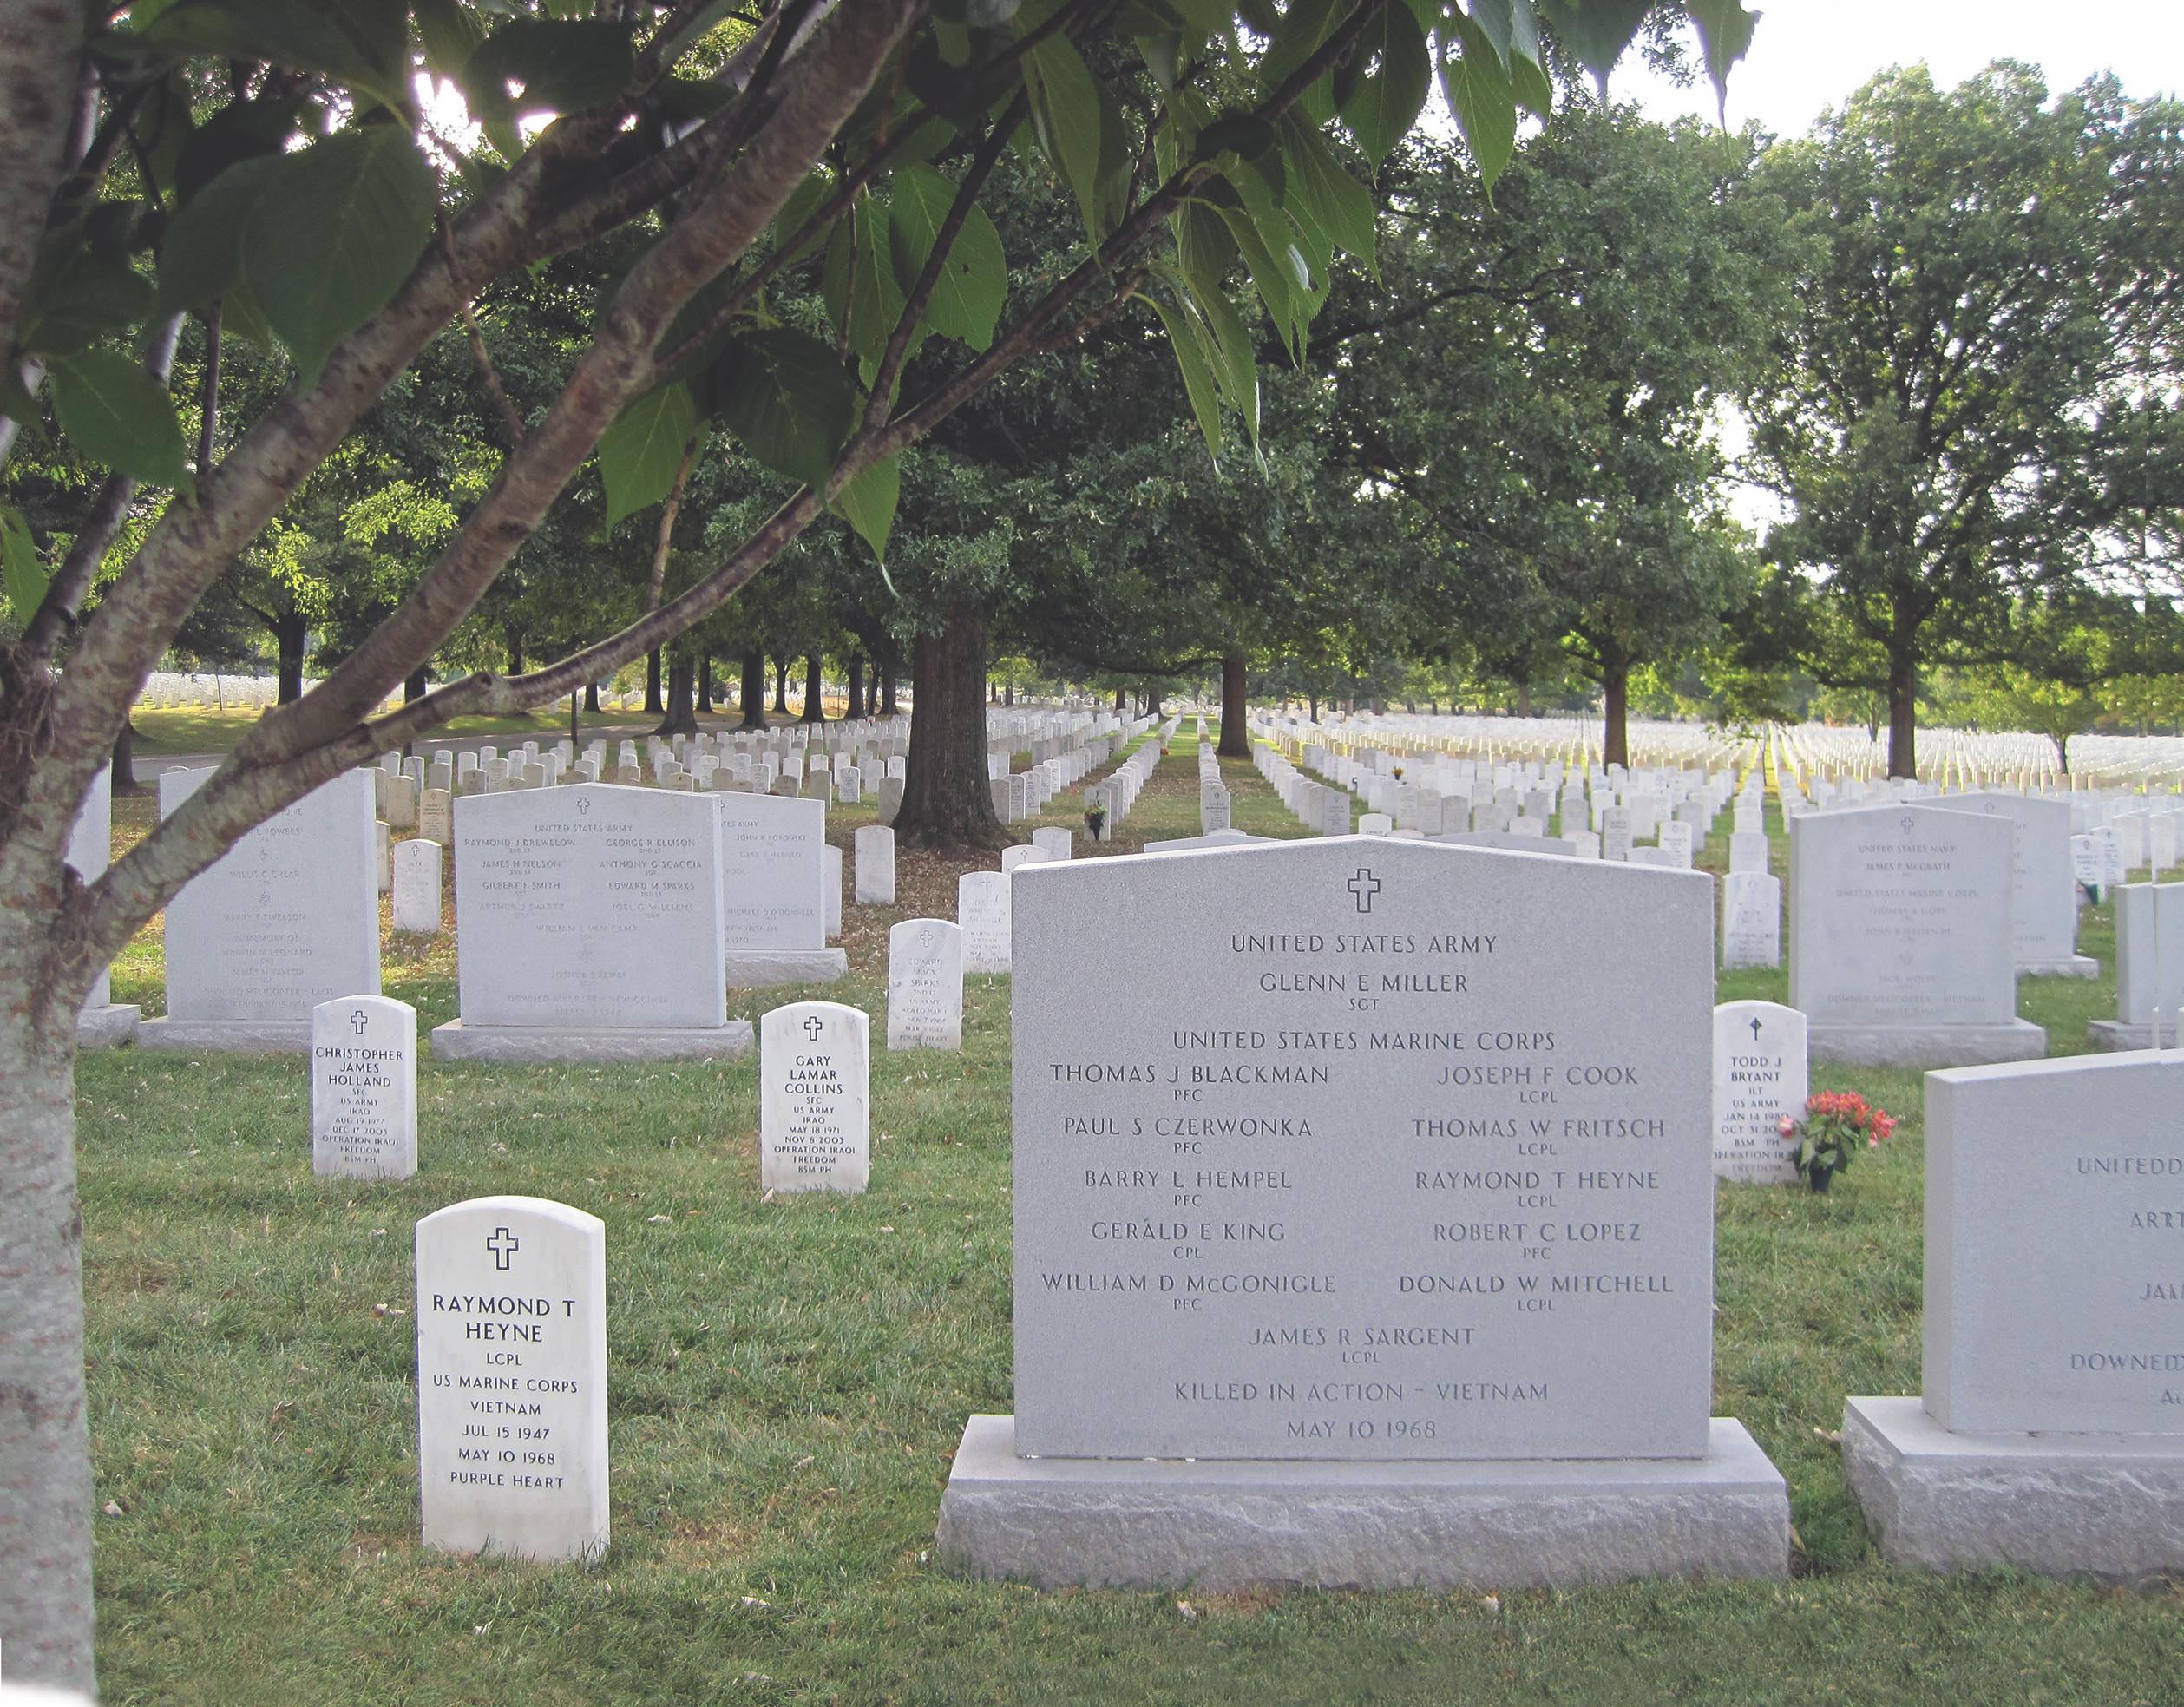 In the evacuation of Ngok Tavak, fallen troops had to be left behind. In 1999, recovered remains were identified as those of 11 Marines and one Special Forces man. Most are in a collective grave at Arlington National Cemetery. / A. Horan